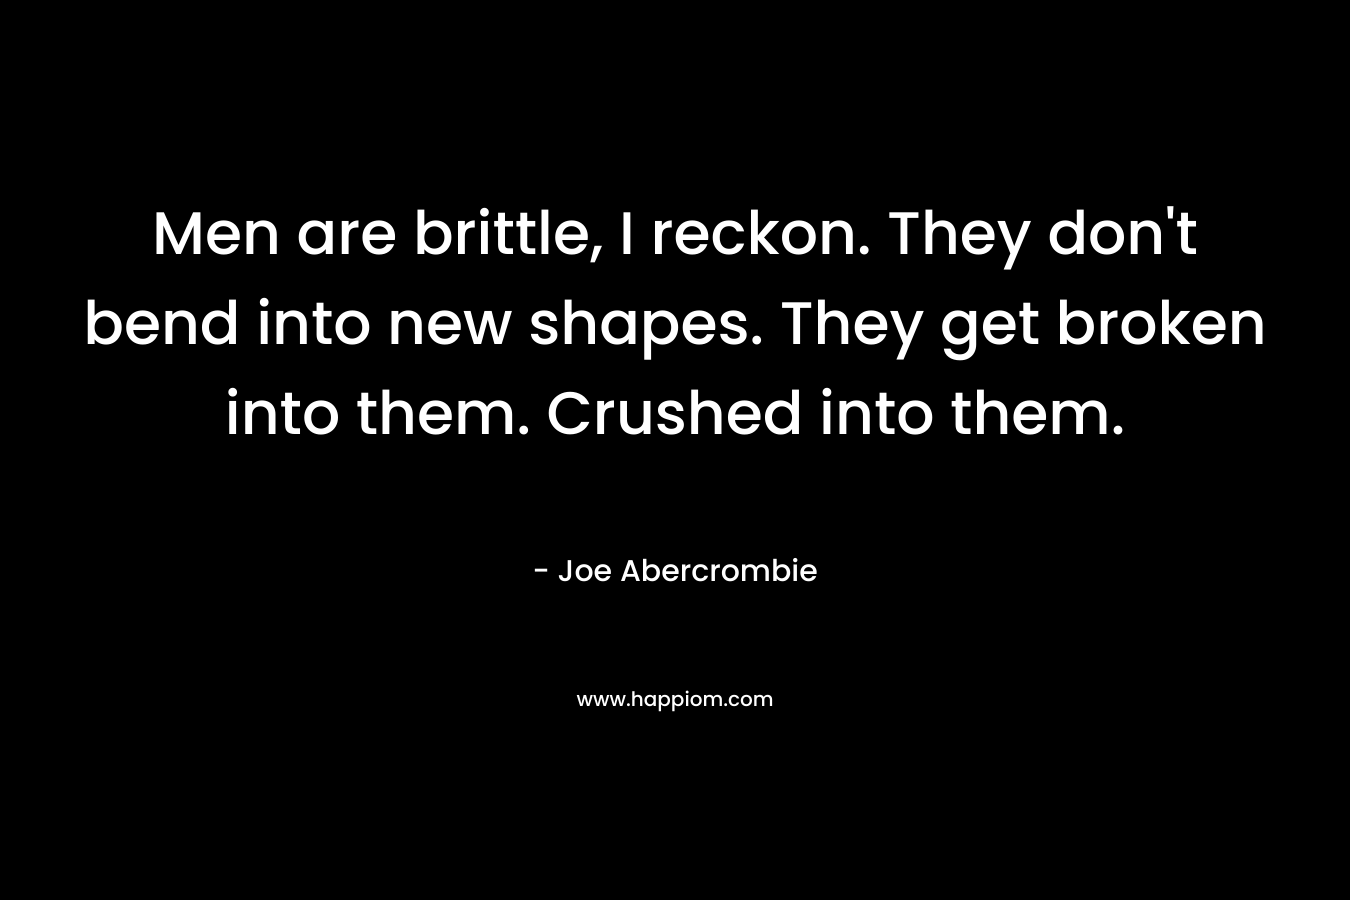 Men are brittle, I reckon. They don’t bend into new shapes. They get broken into them. Crushed into them. – Joe Abercrombie